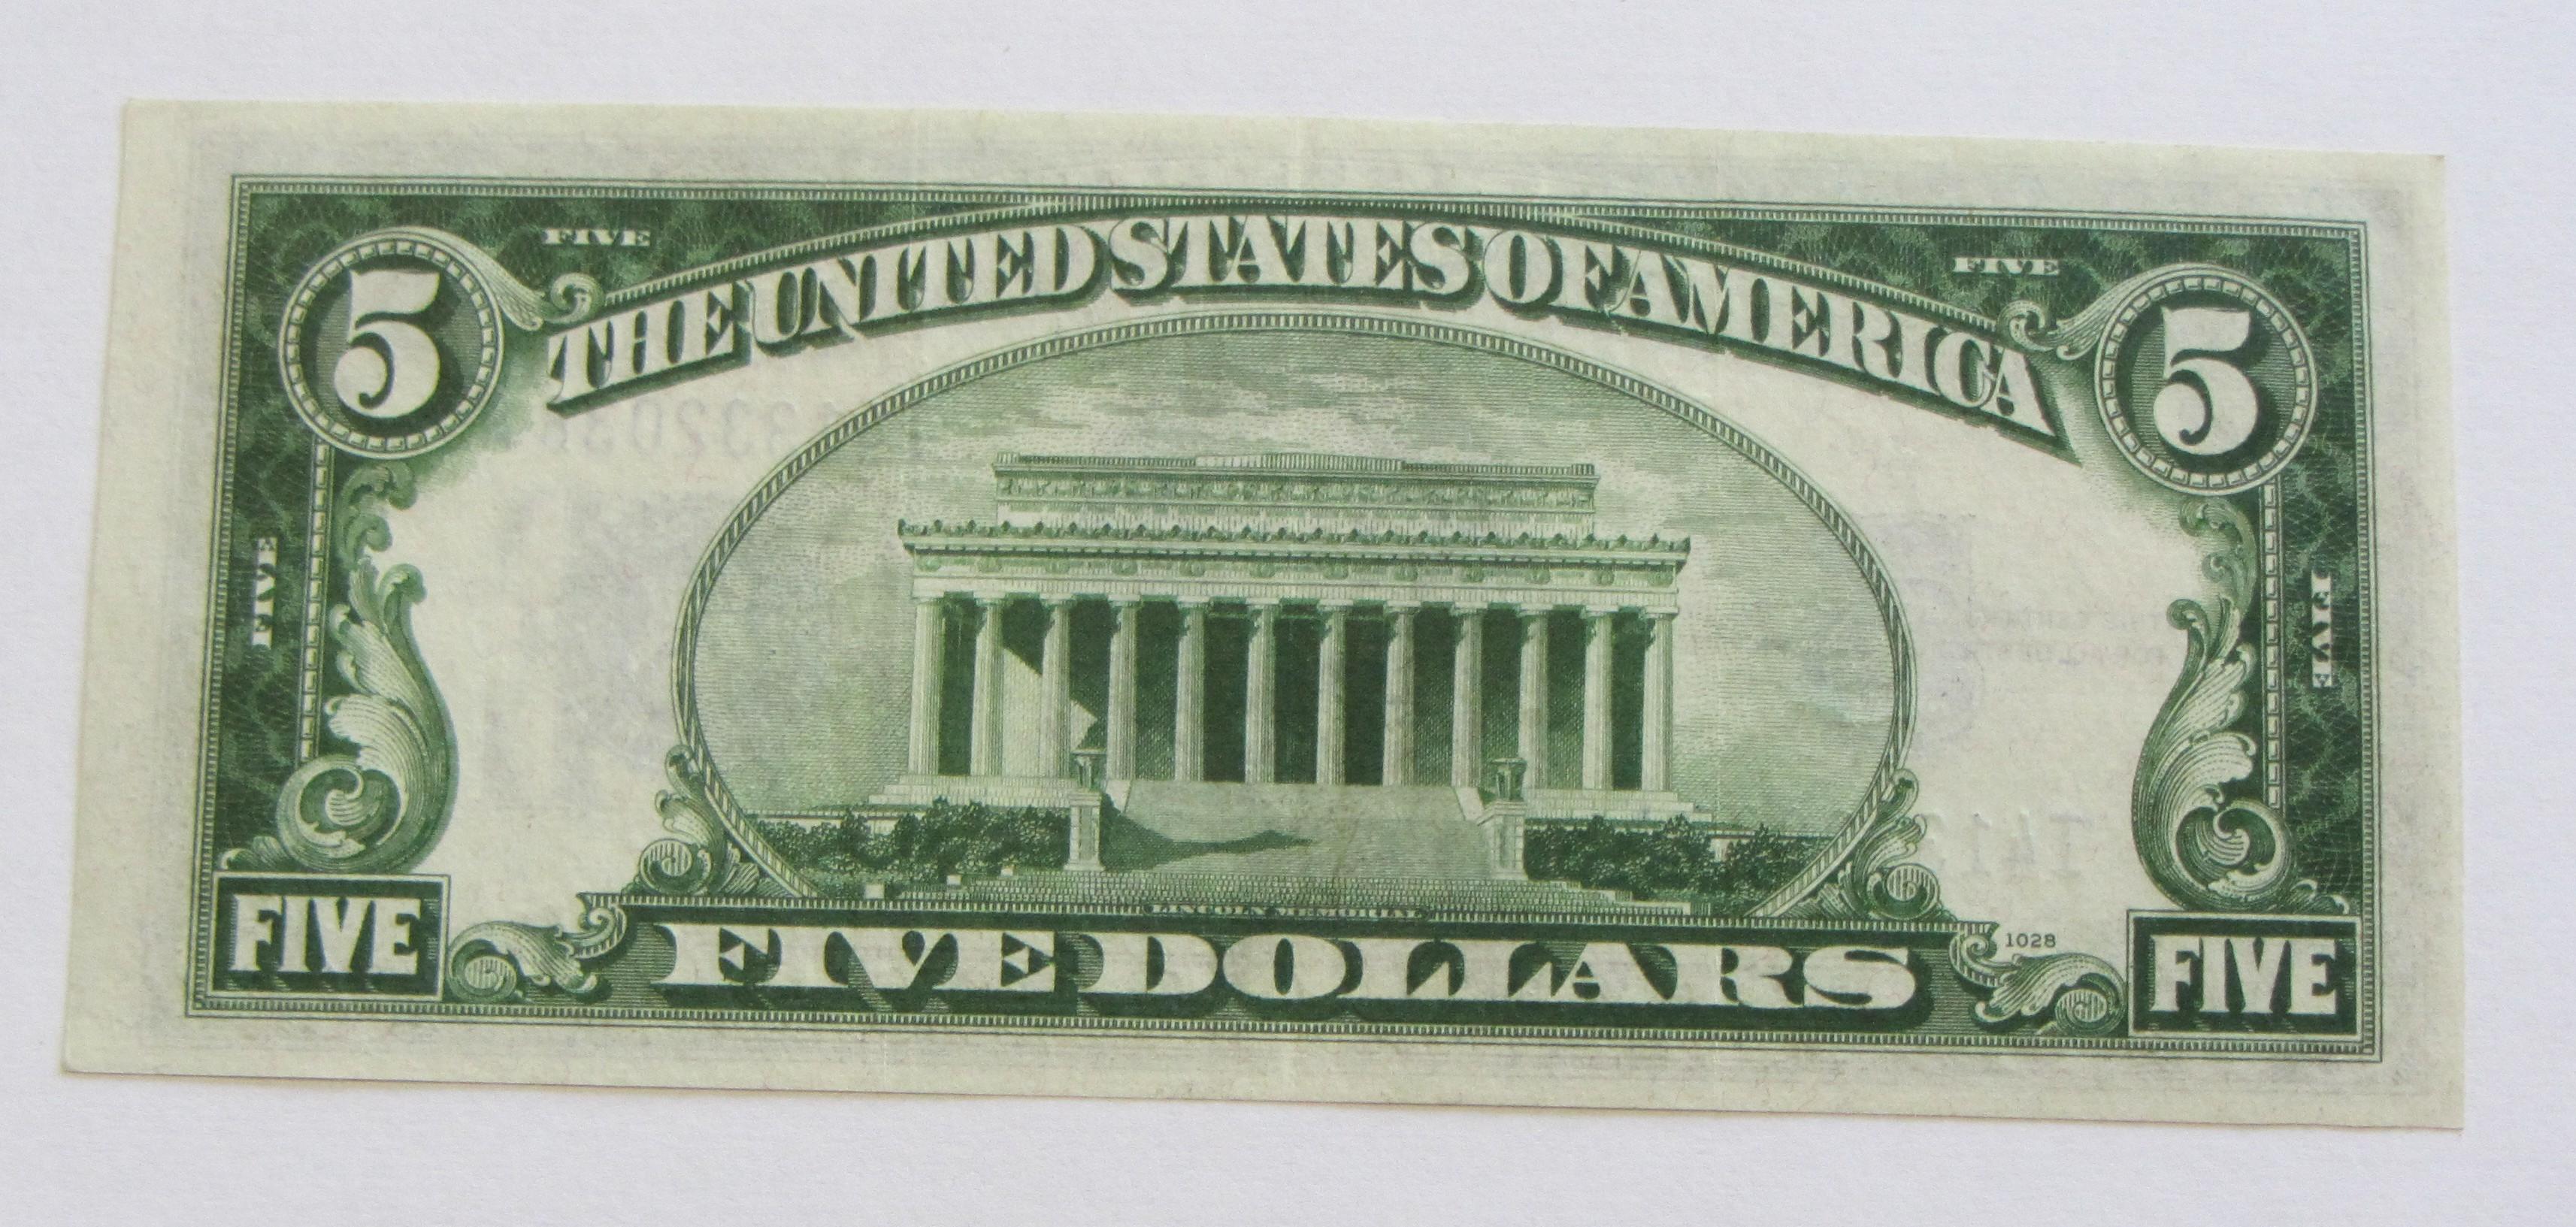 $5 SILVER CERTIFICATE 1934-A CRISP YOU CAN SEE EMBOSSING IN THE PICTURE